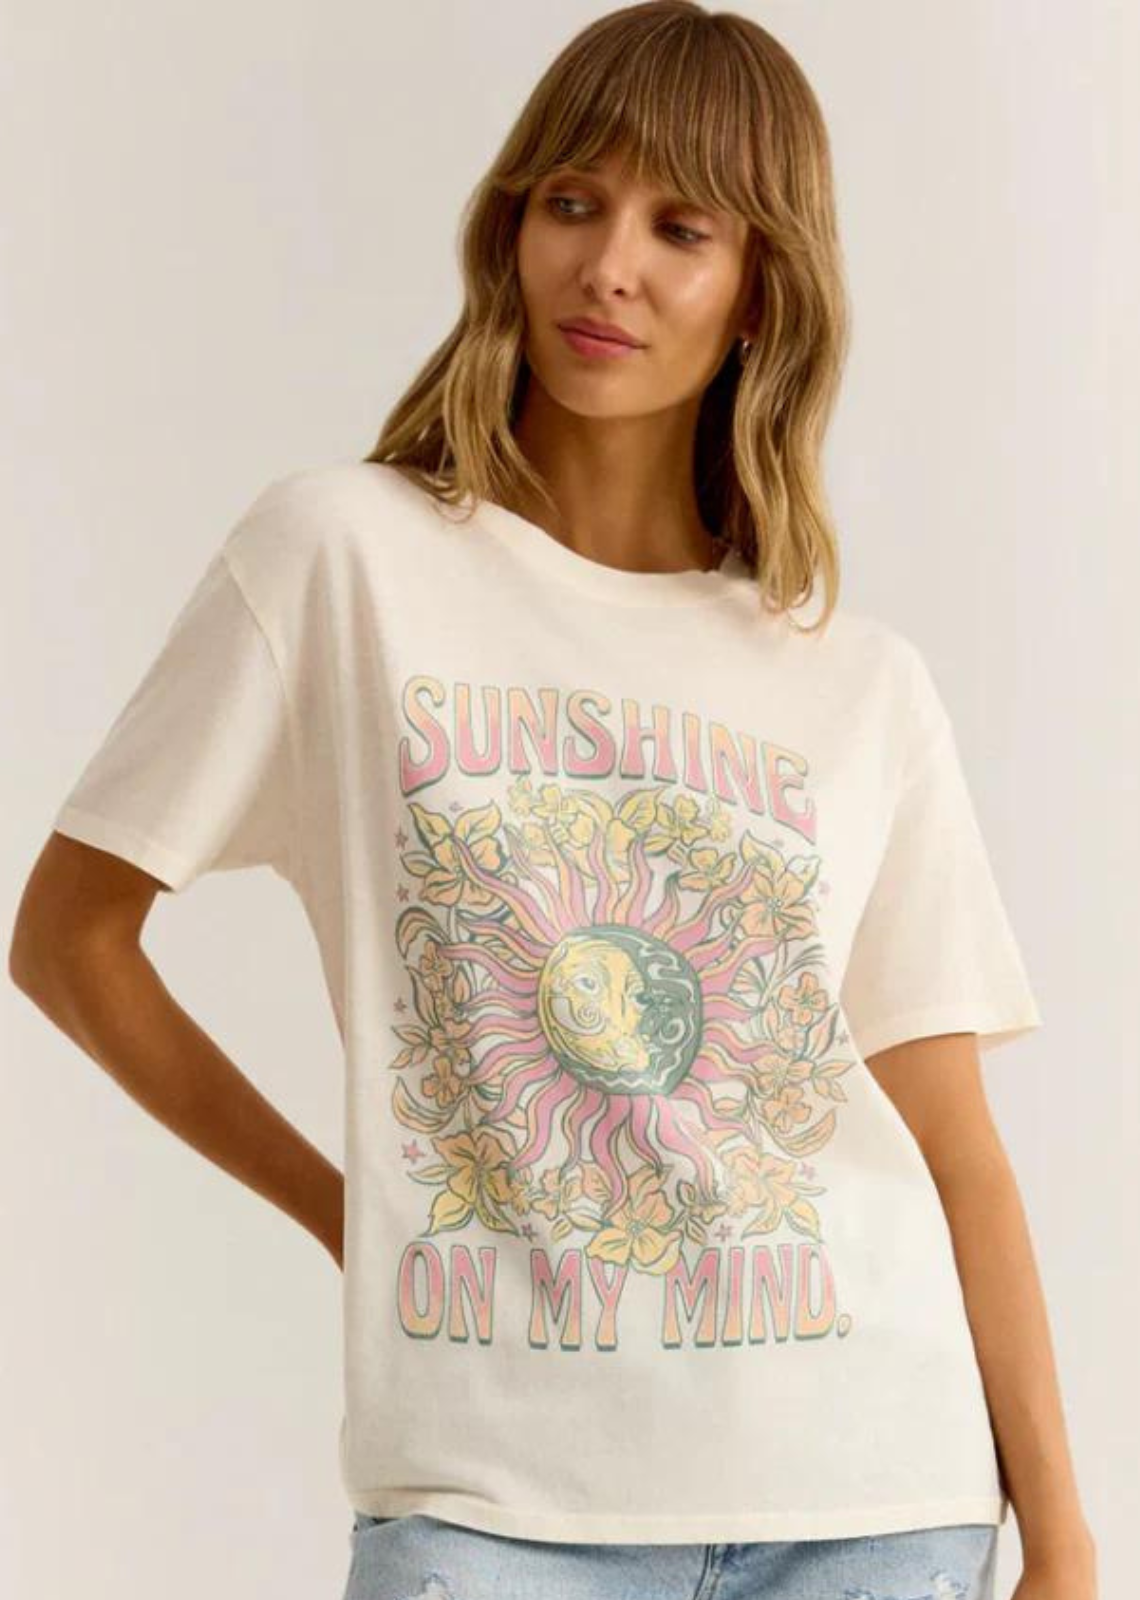 Z Supply Sunshine Boyfriend Tee. Get ready to spread sunshine wherever you go with our Sunshine Boyfriend Tee! This must-have top features a charming poster art screenprint, a classic crew neck, and a vintage wash for a timeless look. Made from soft hand cotton jersey for ultimate comfort. Bring a little brightness to your wardrobe today! Model is wearing a size small.